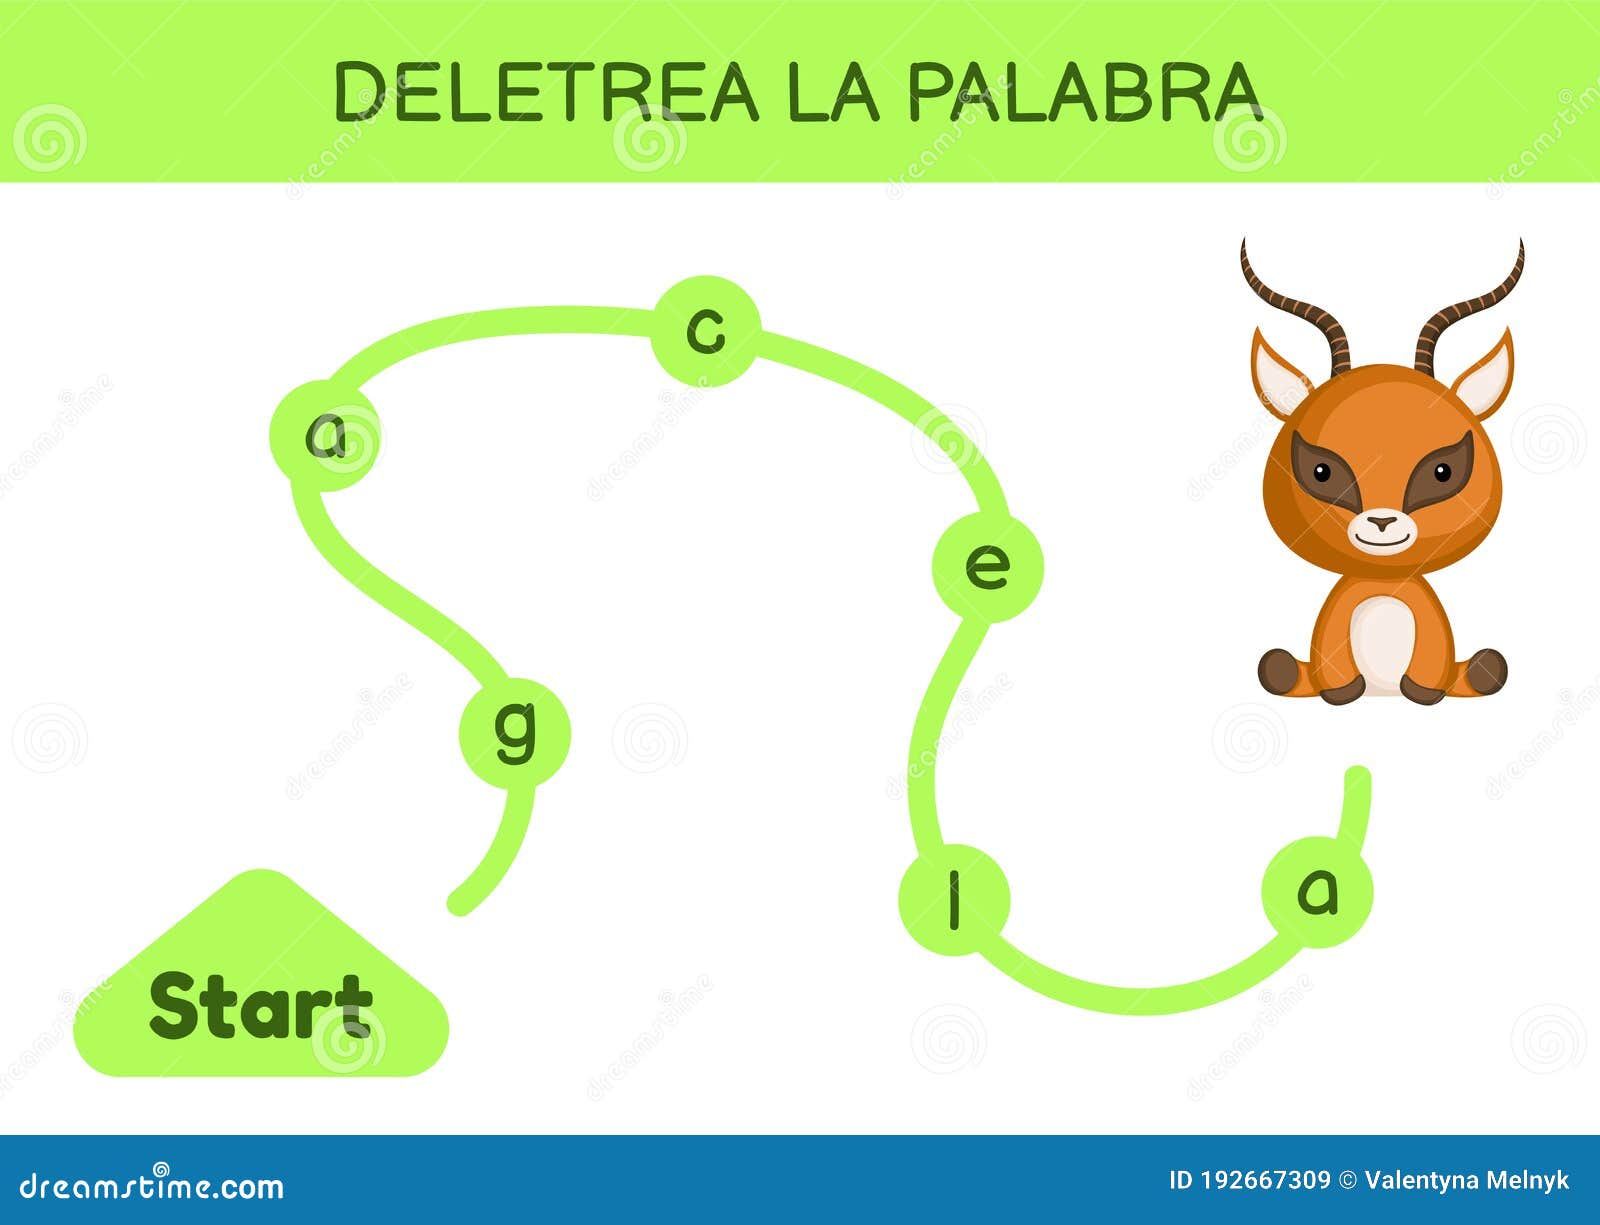 deletrea la palabra - spell the word. maze for kids. spelling word game template. learn to read word gazelle. activity page for